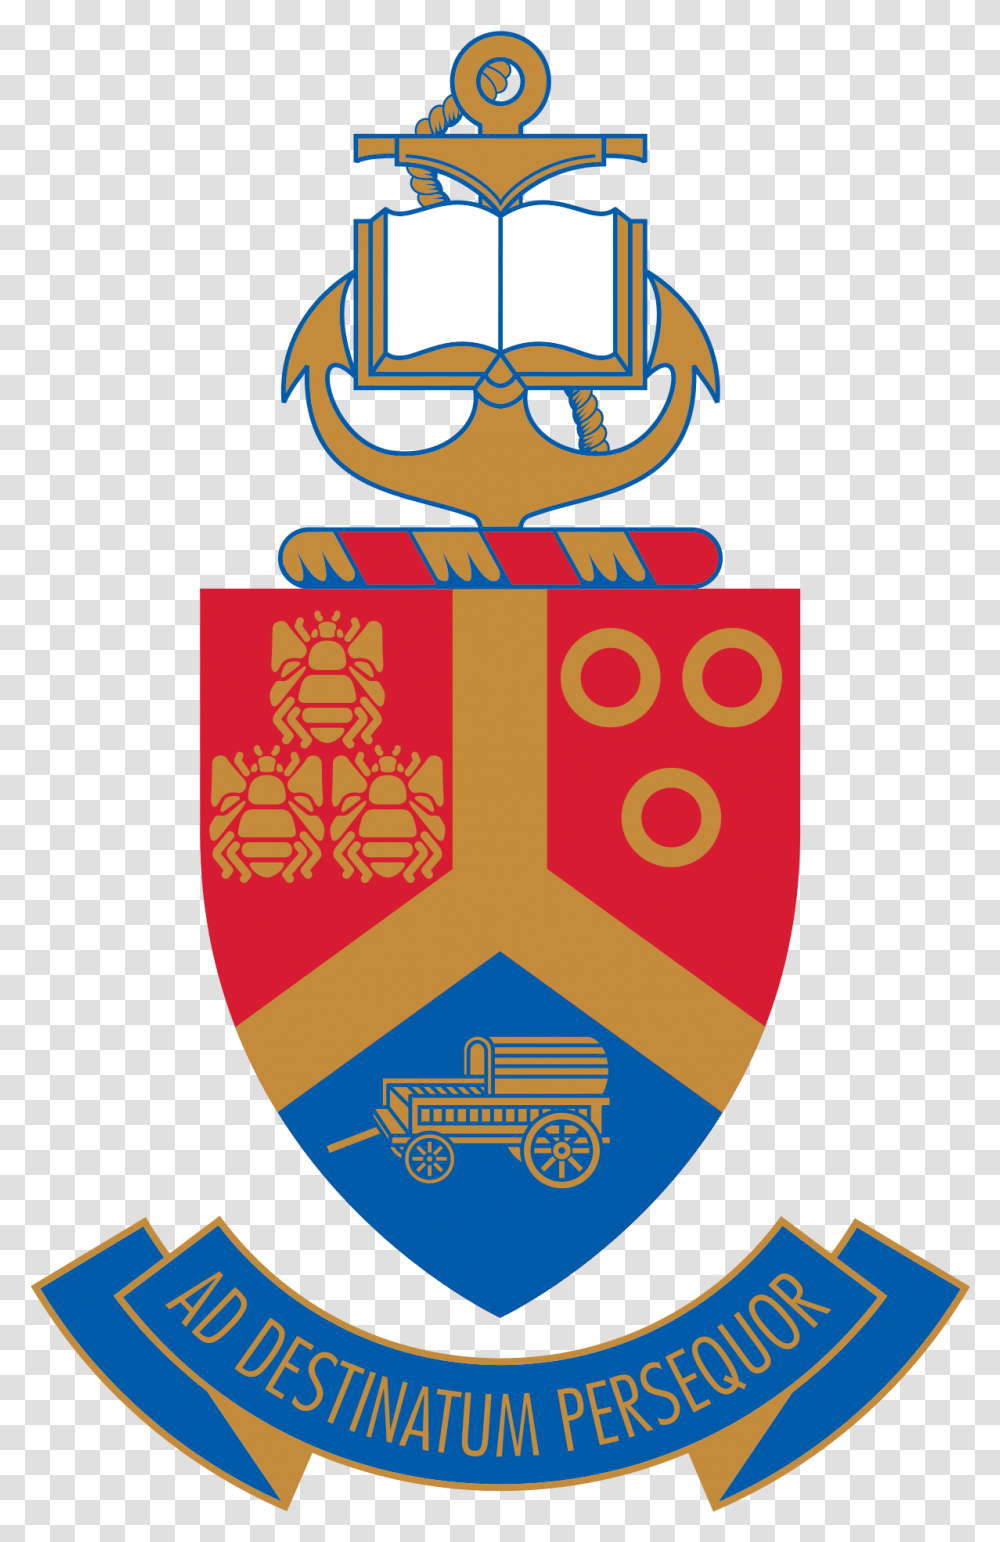 University Of Pretoria University Of Pretoria Logo, Armor, Shield, Poster, Advertisement Transparent Png